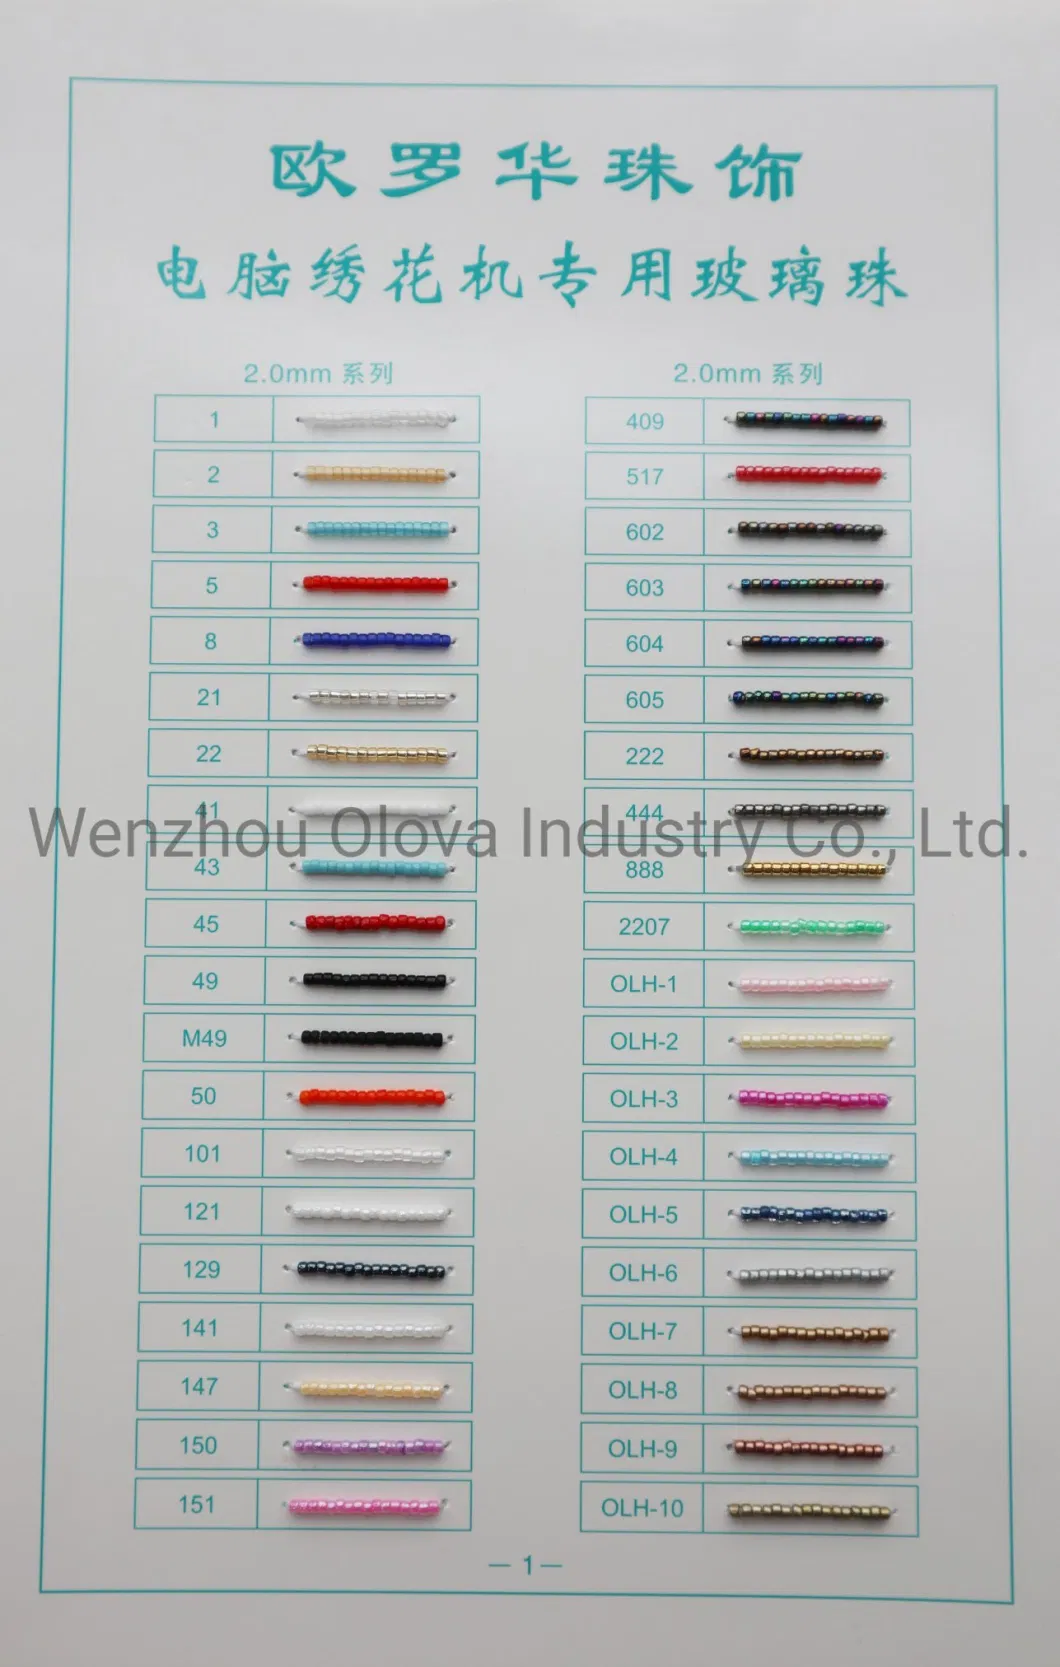 2.0mm Glass Beads for Beads Device